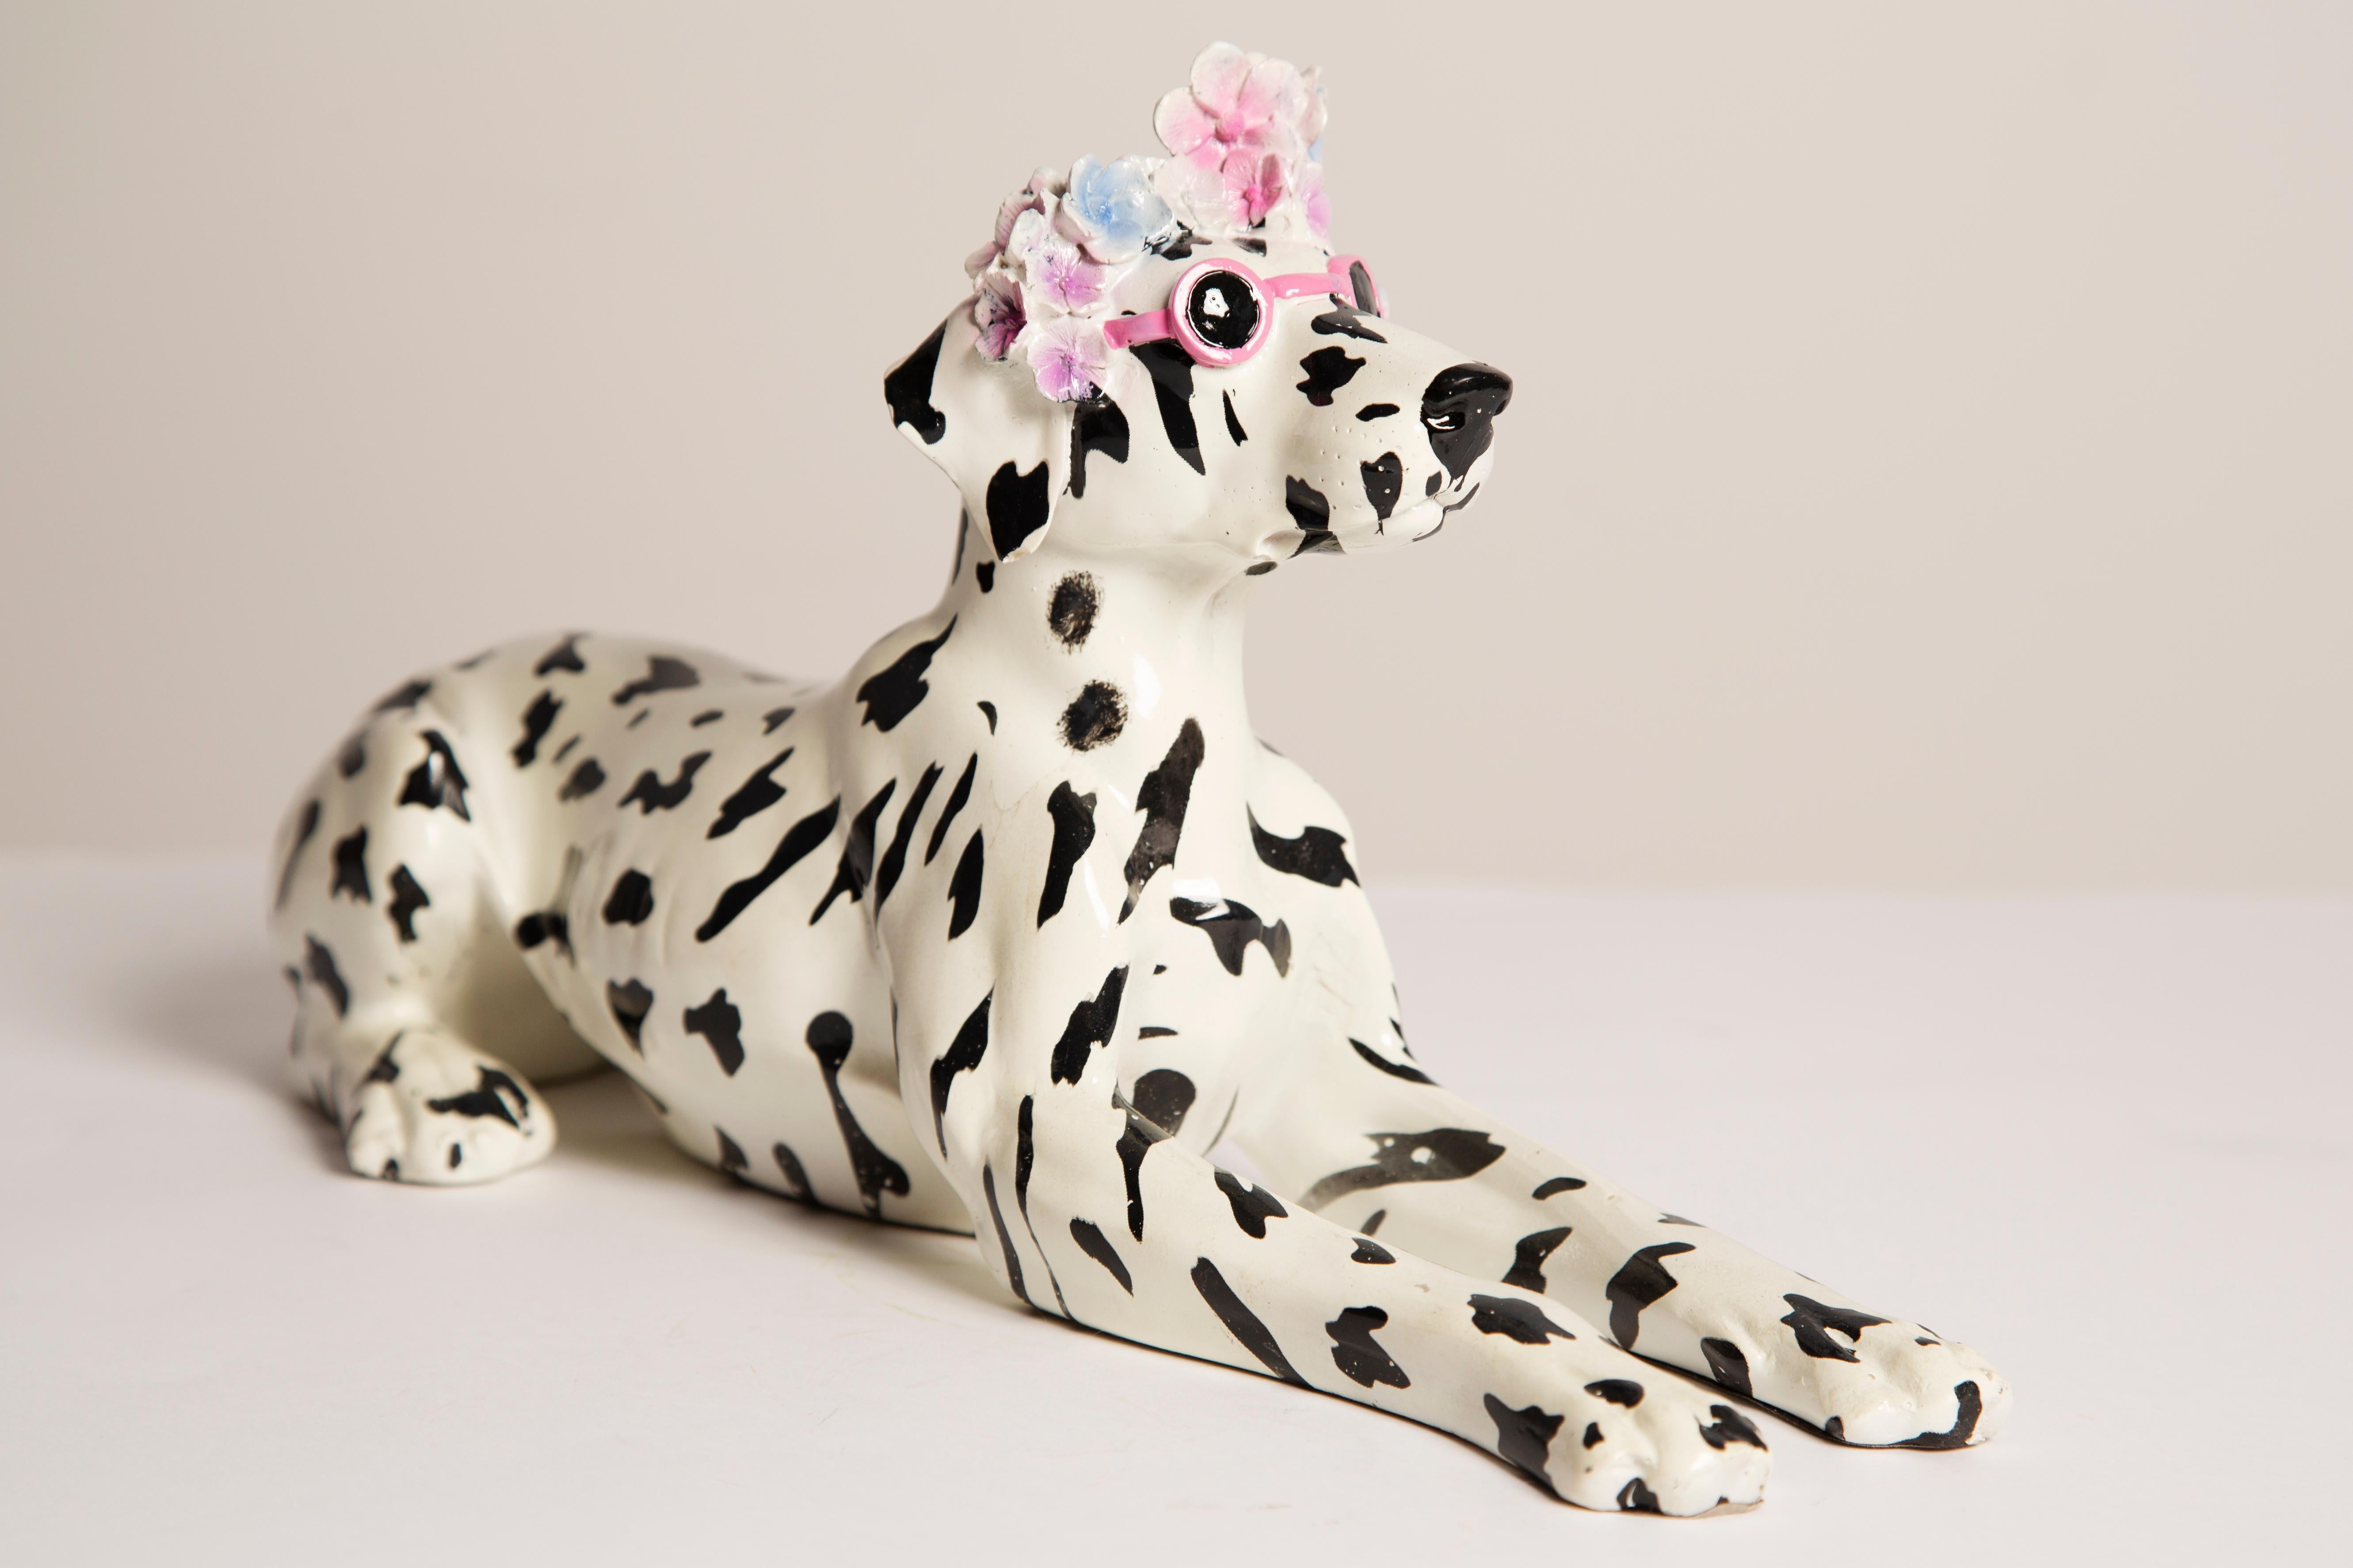 Hand-Painted 20th Century White Dalmatian Dog Sculpture, Italy, 2000s